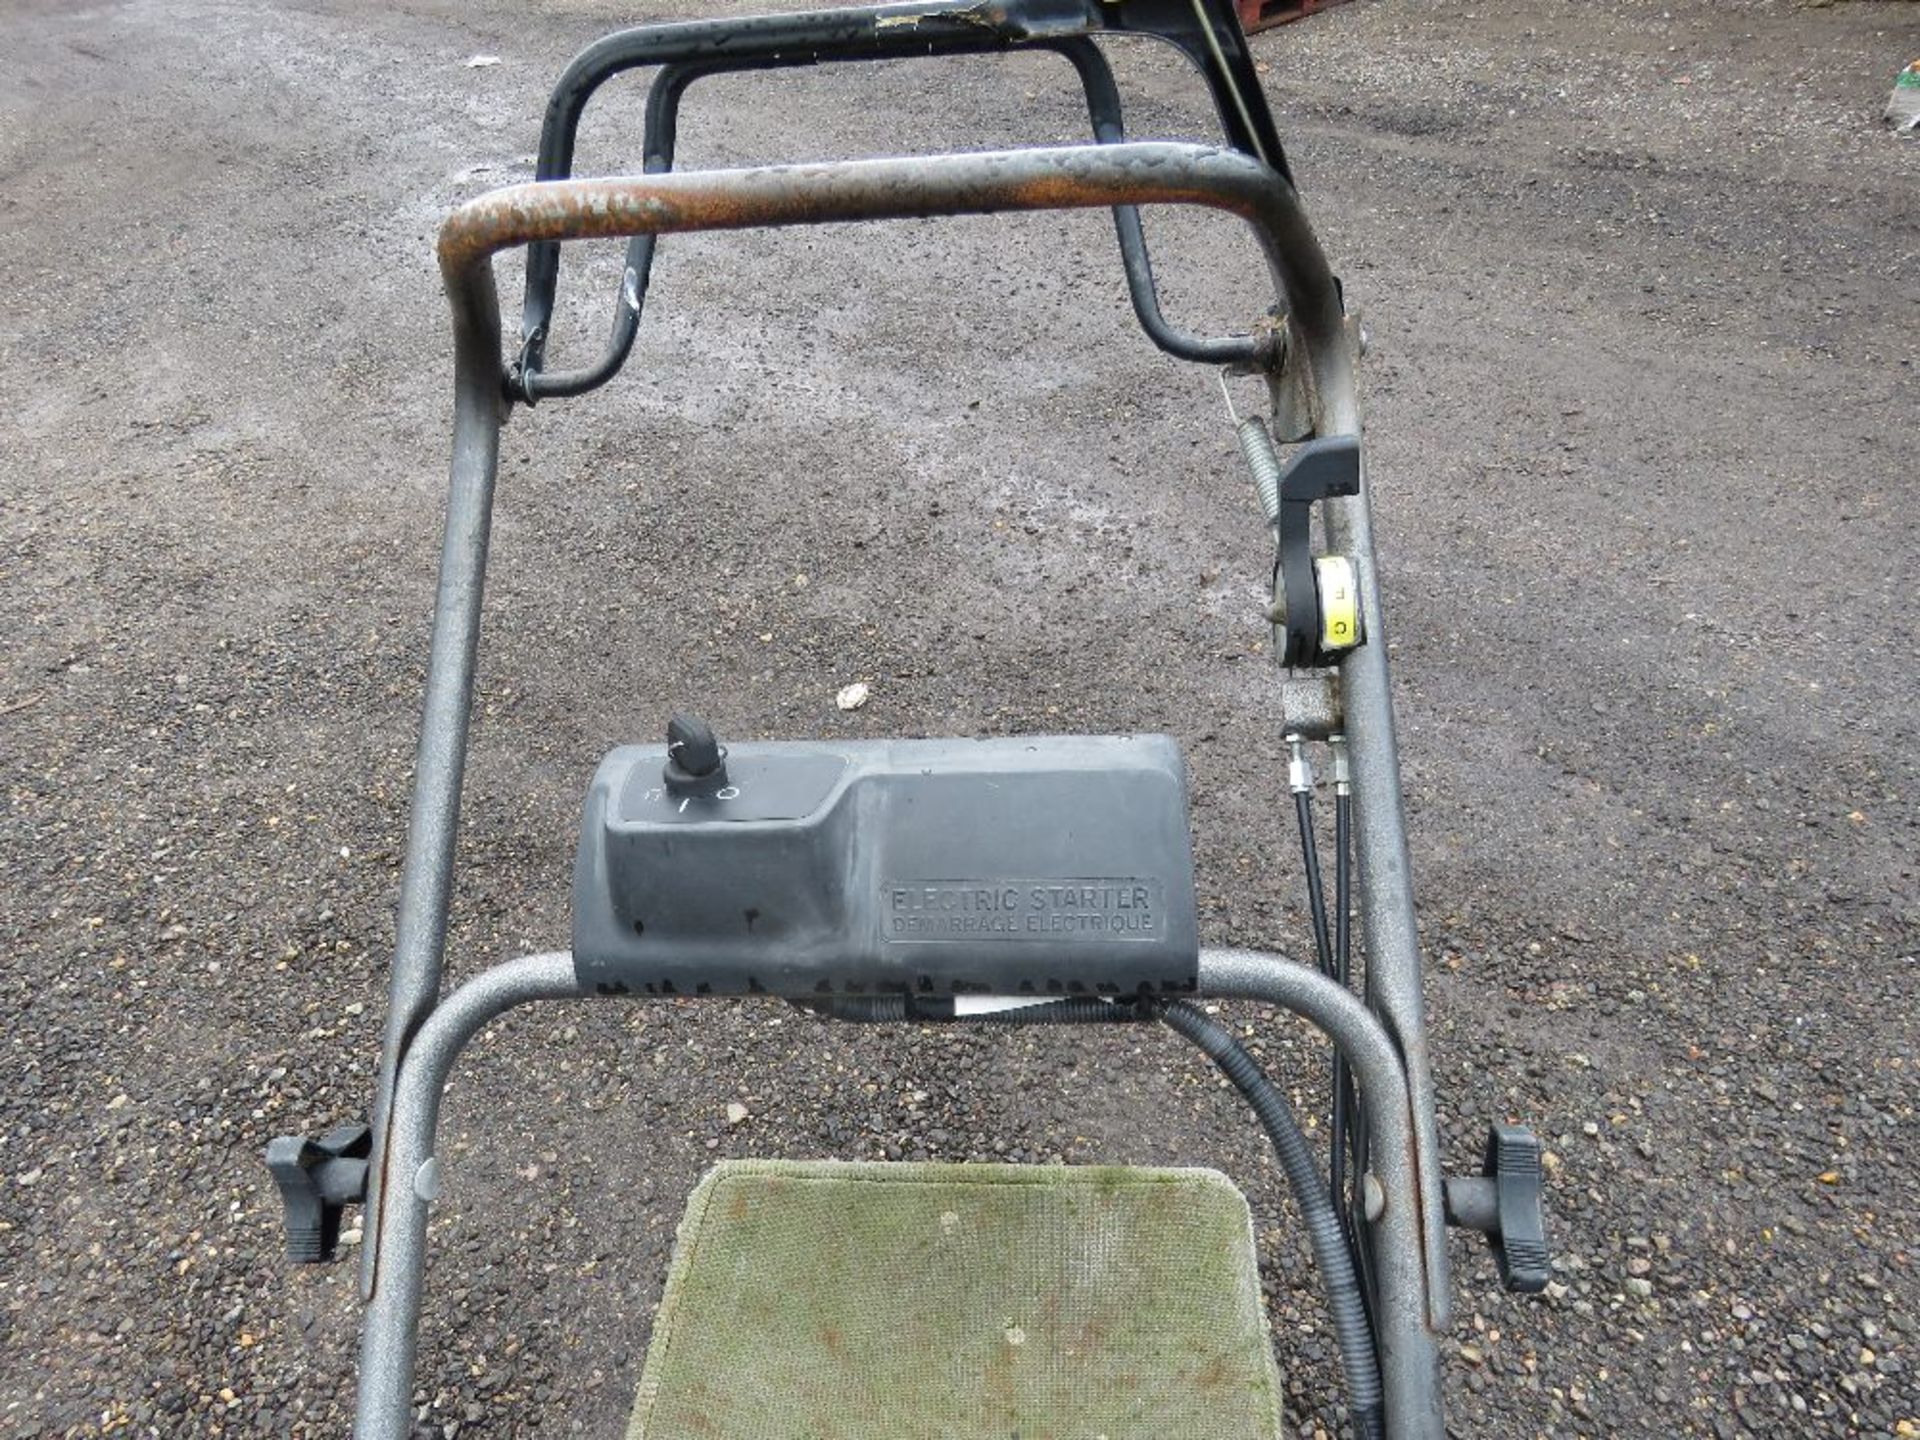 HONDA ELECTRIC START ROLLER MOWER WITH COLLECTOR. SEEN TO RUN BUT DRIVE WEAK/FAULTY. THIS LOT IS - Image 5 of 5